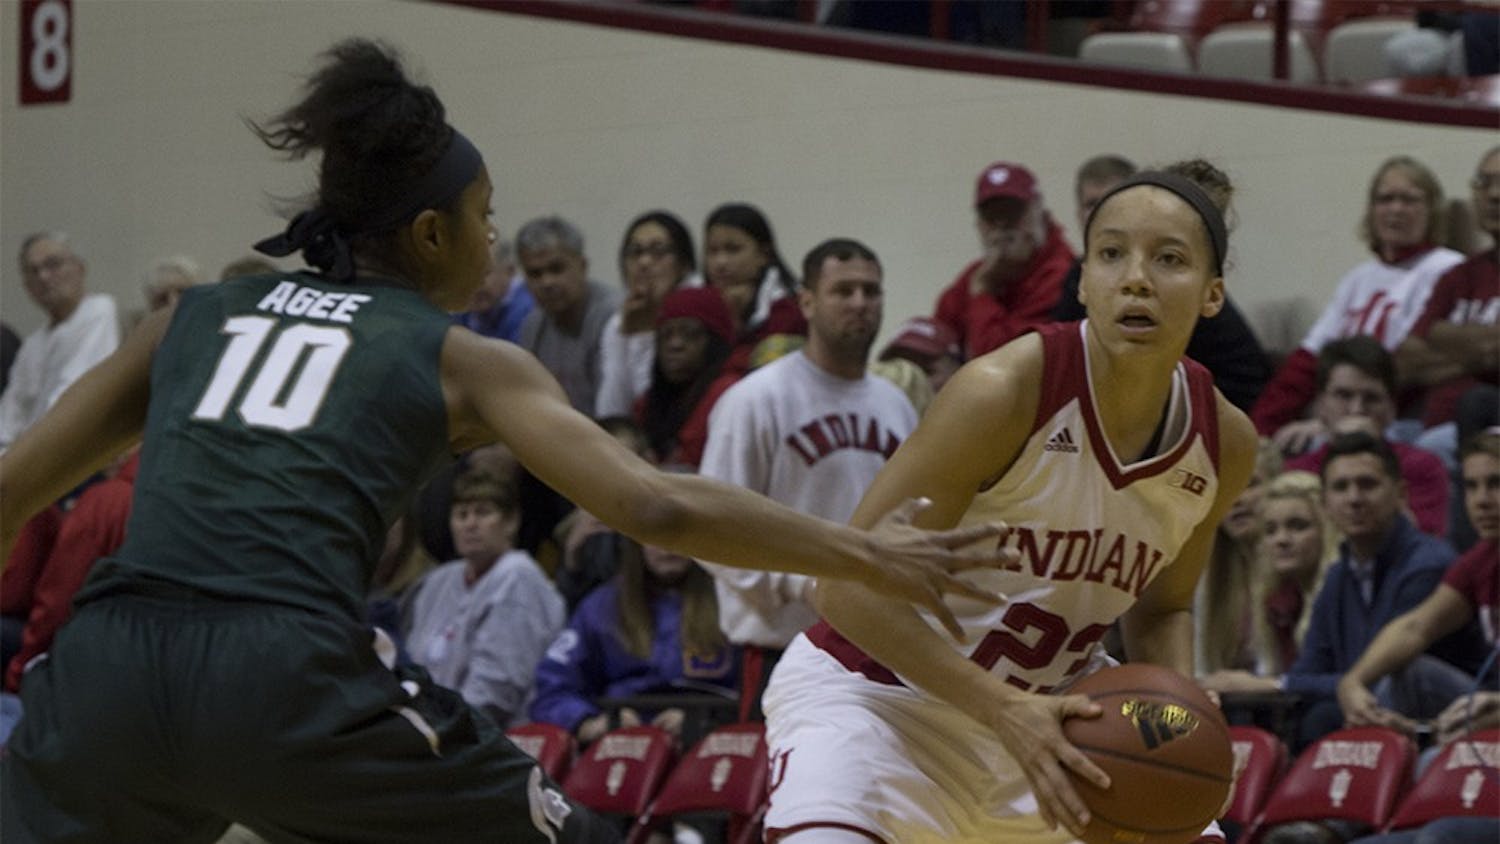 Junior guard Alexis Gassion looks to move around a Michigan State player on Wednesday night at Assembly Hall. The Hoosiers won the game 85-61.